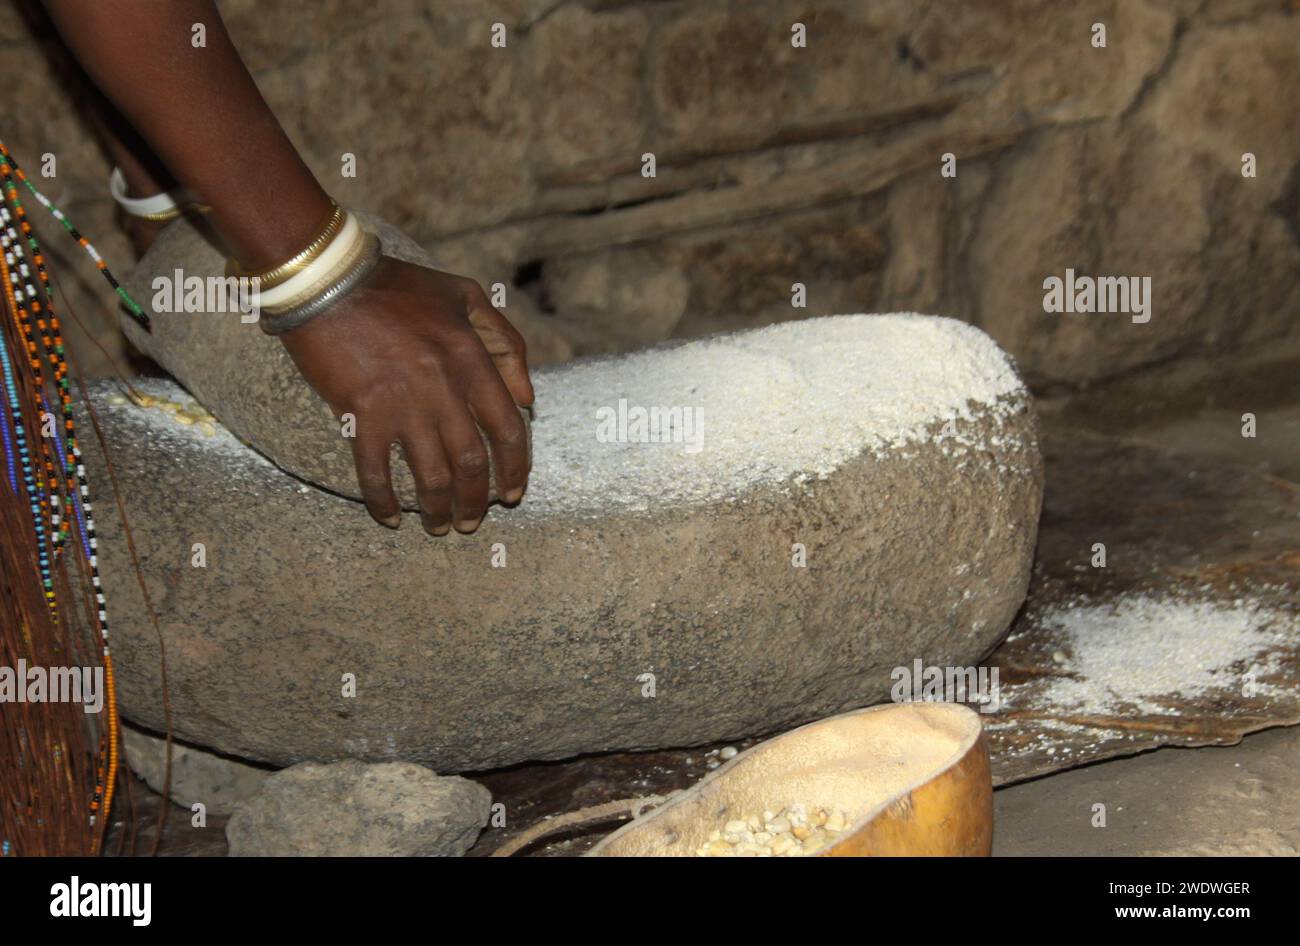 Datoga woman in traditional leather dress adorned with beads and brass bracelets milling grain to flour. Stock Photo